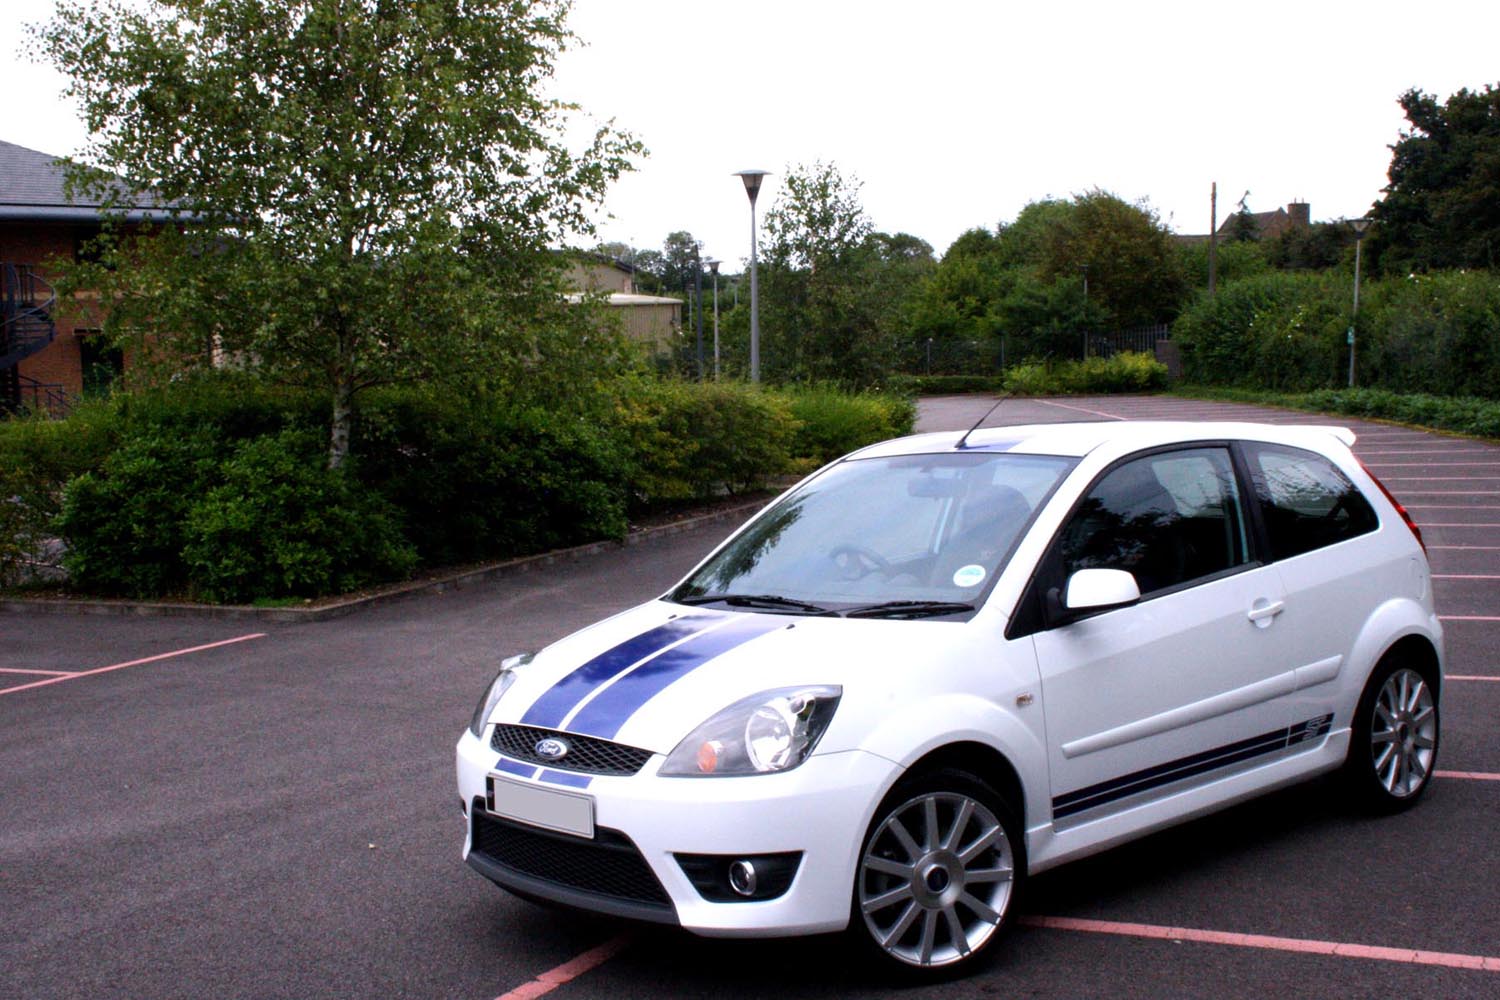 2007 Ford fiesta st reviews #5